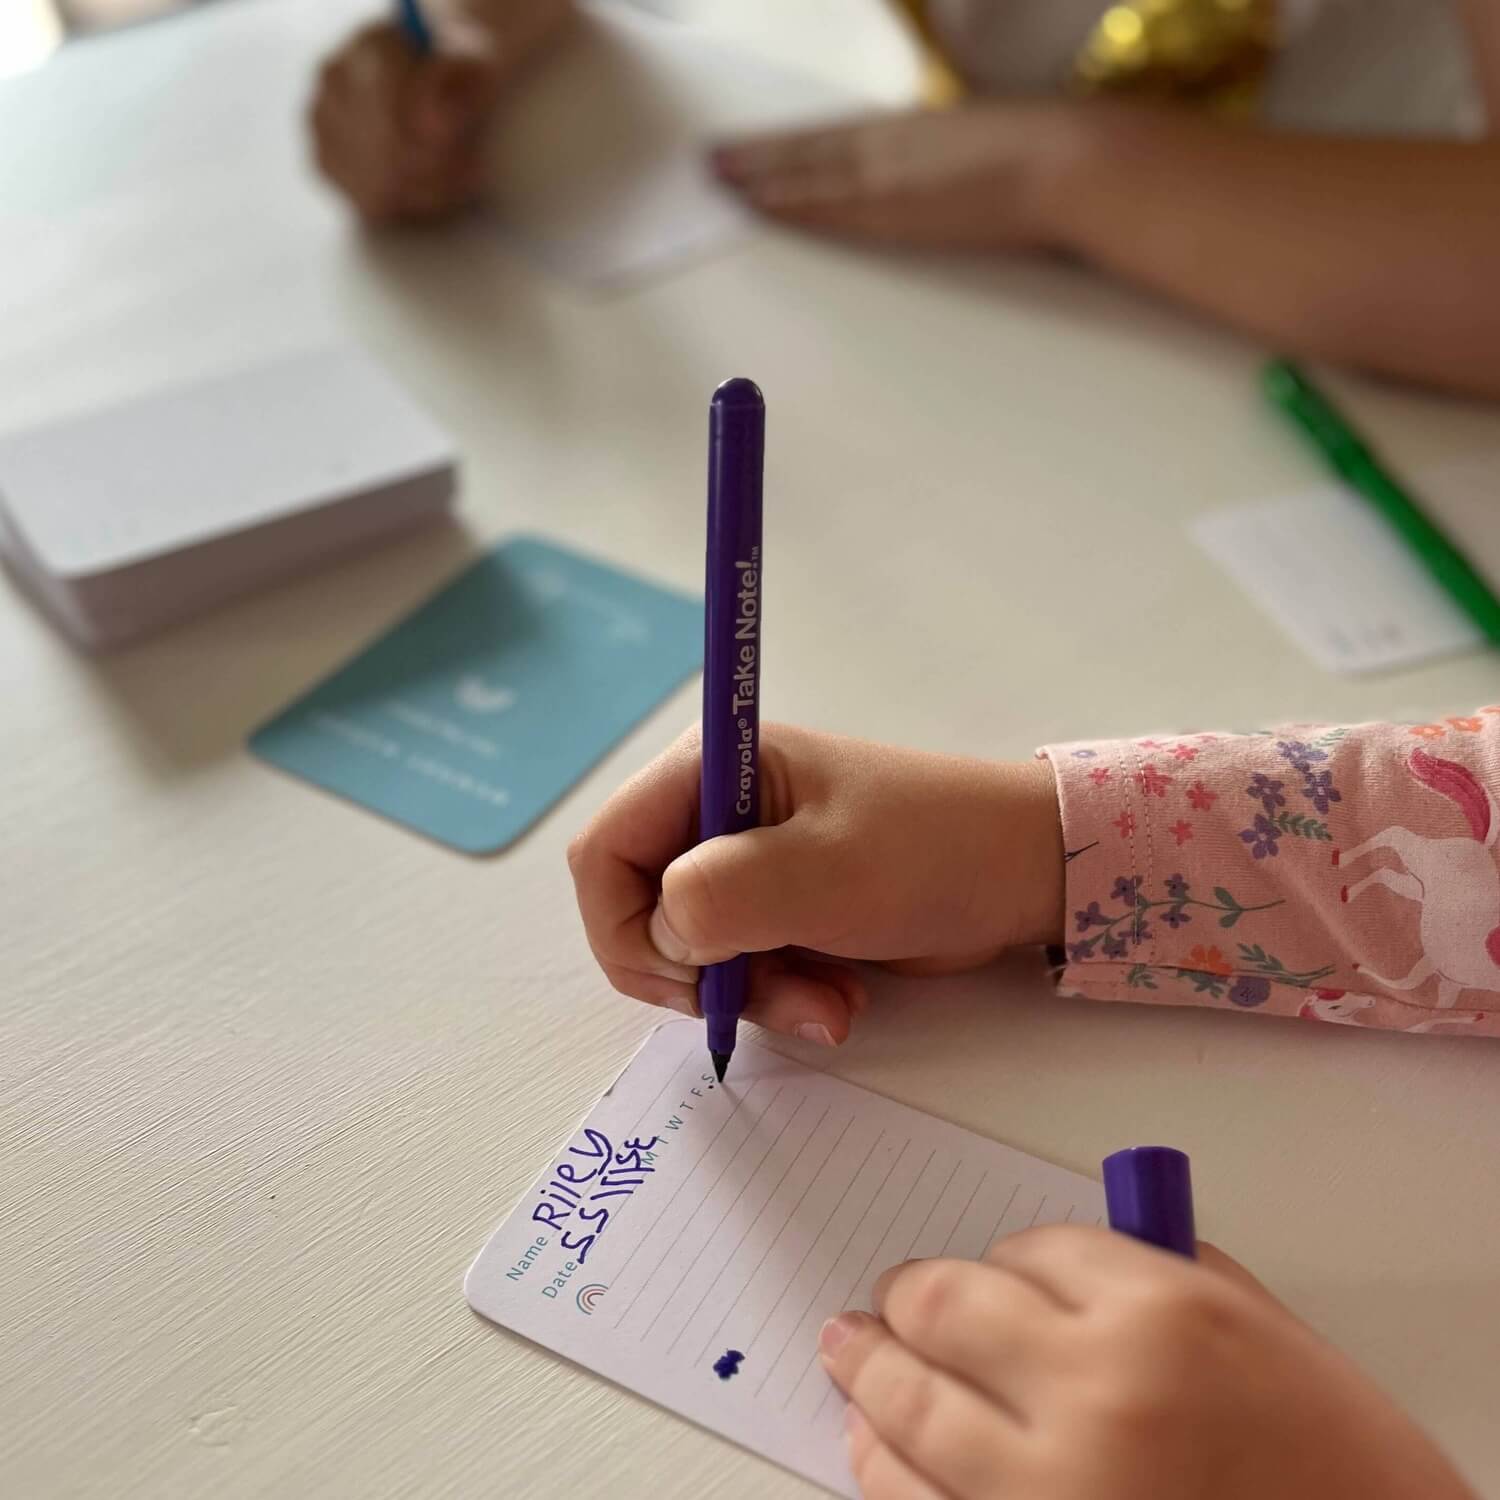 Memory Makers Your Day Edition close up of child writing on card | Journal cards for families